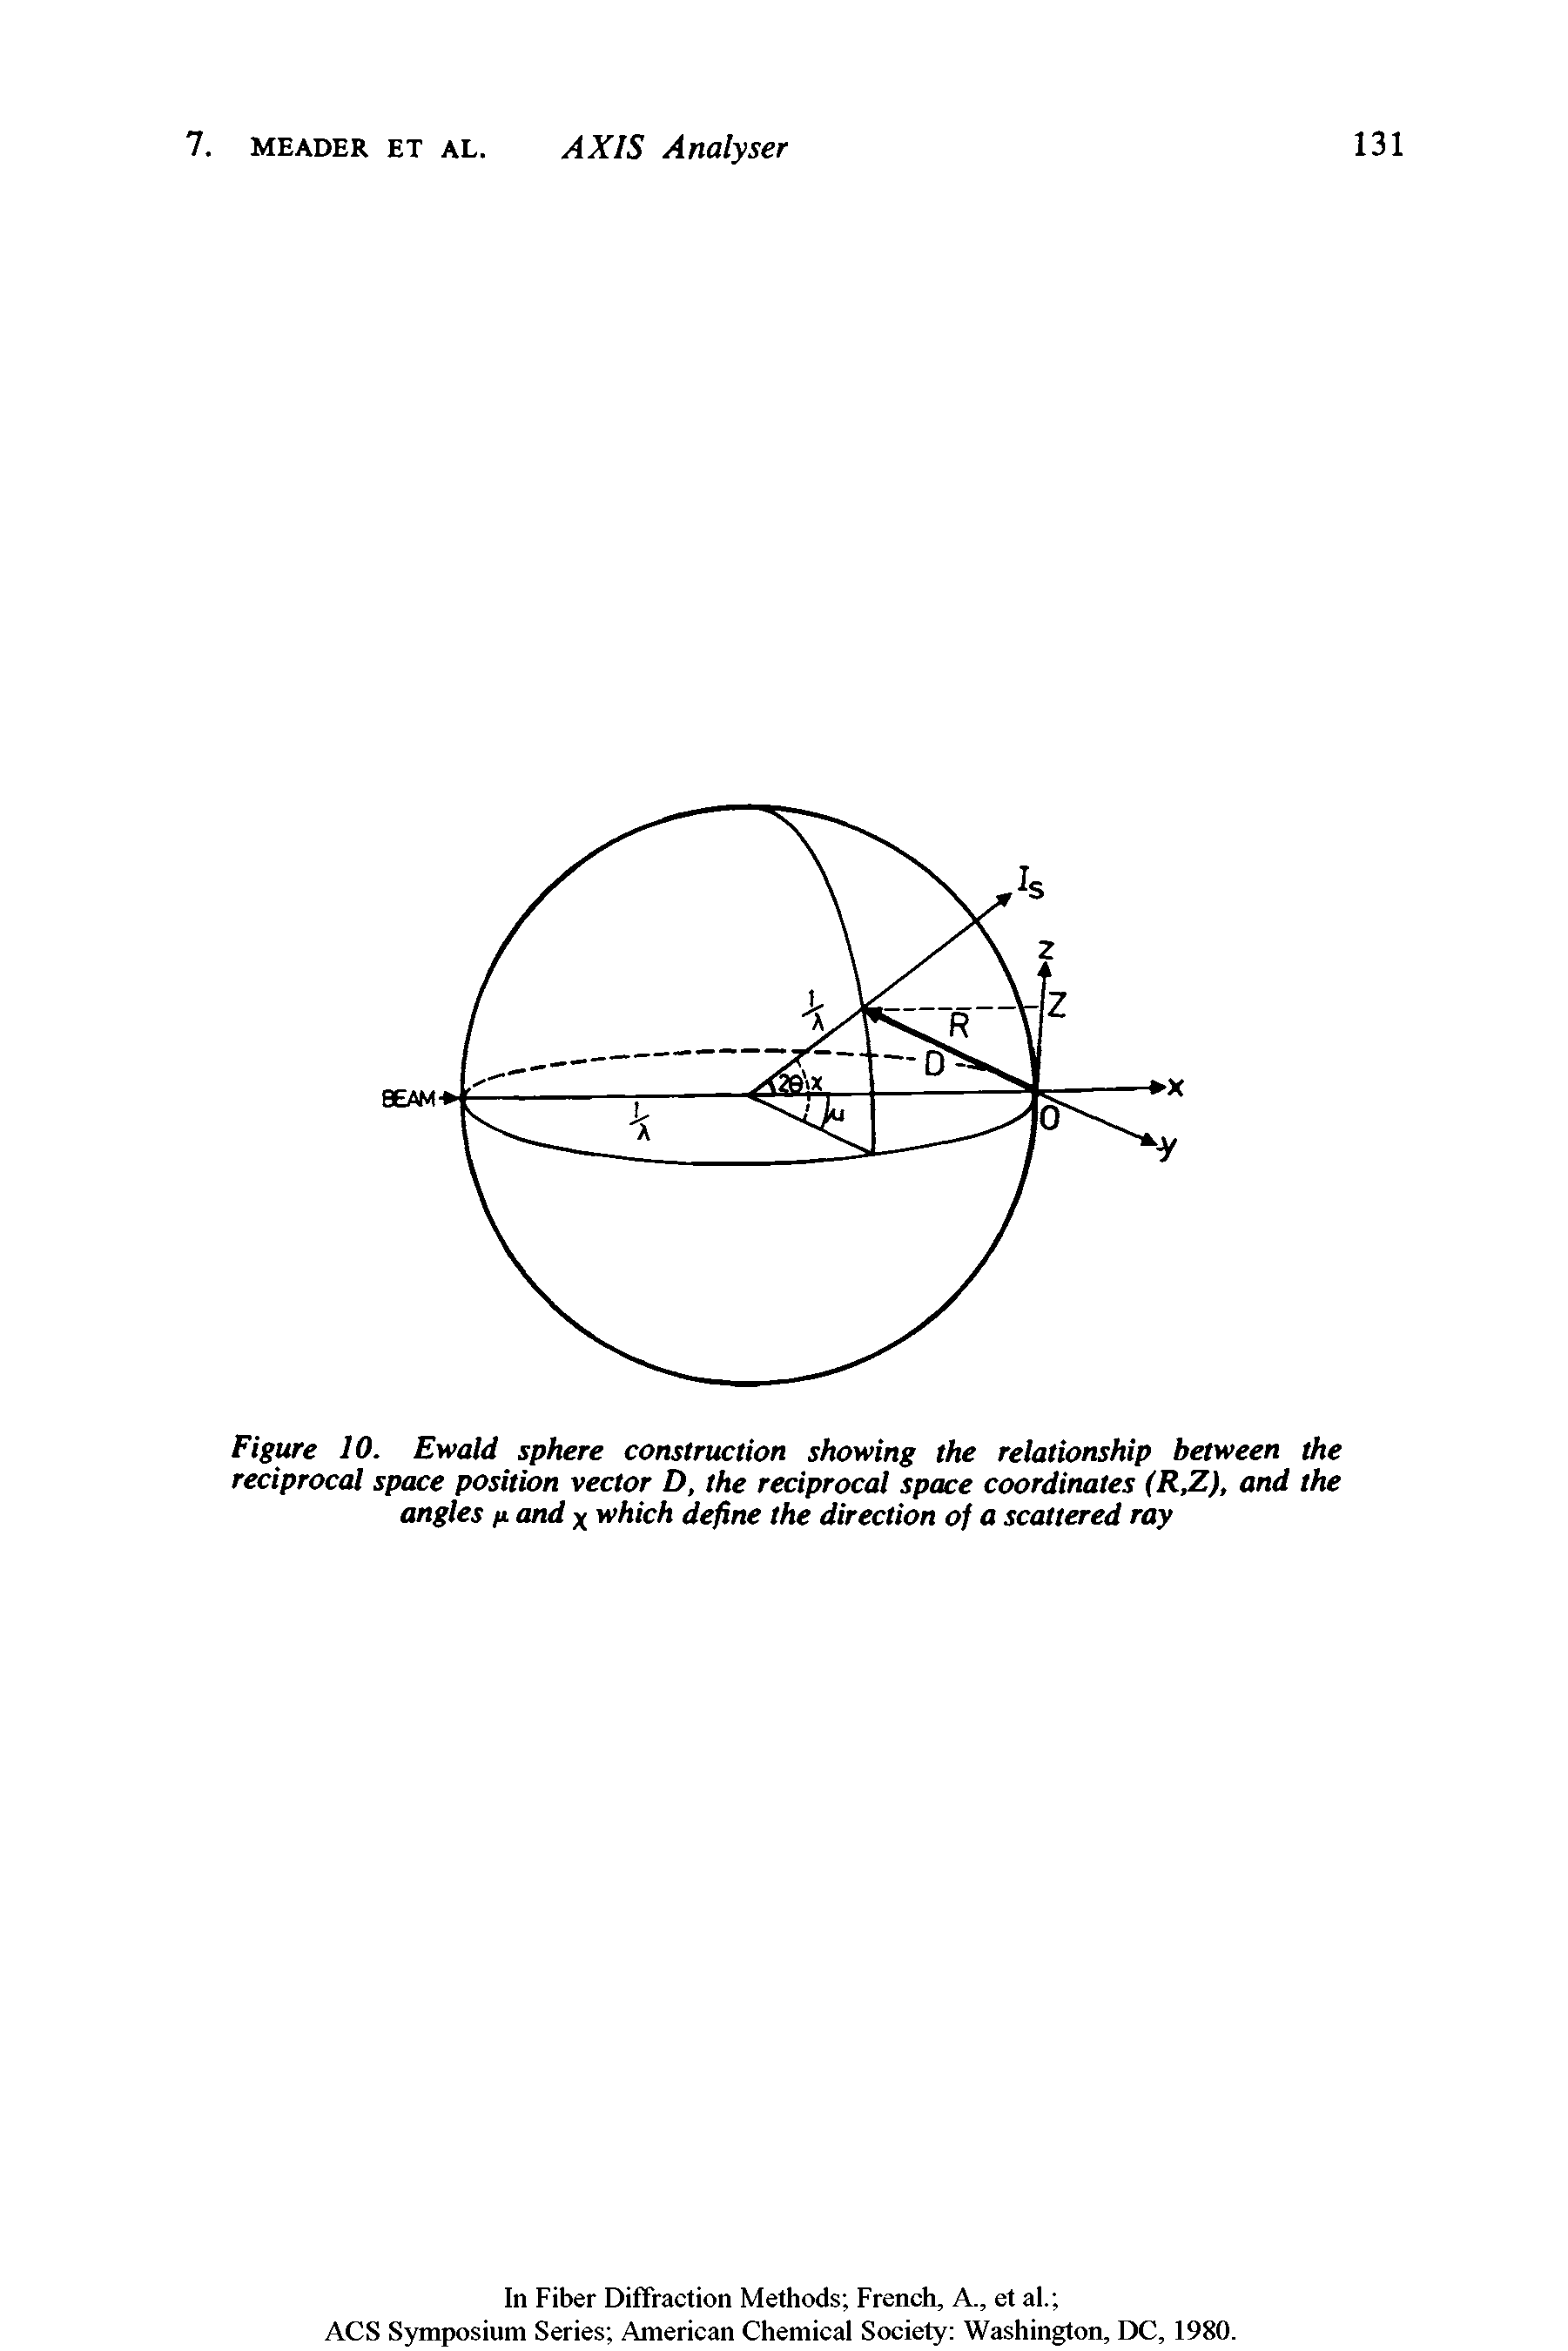 Figure 10. Ewald sphere construction showing the relationship between the reciprocal space position vector D, the reciprocal space coordinates (R,Z), and the angles n and which define the direction of a scattered ray...